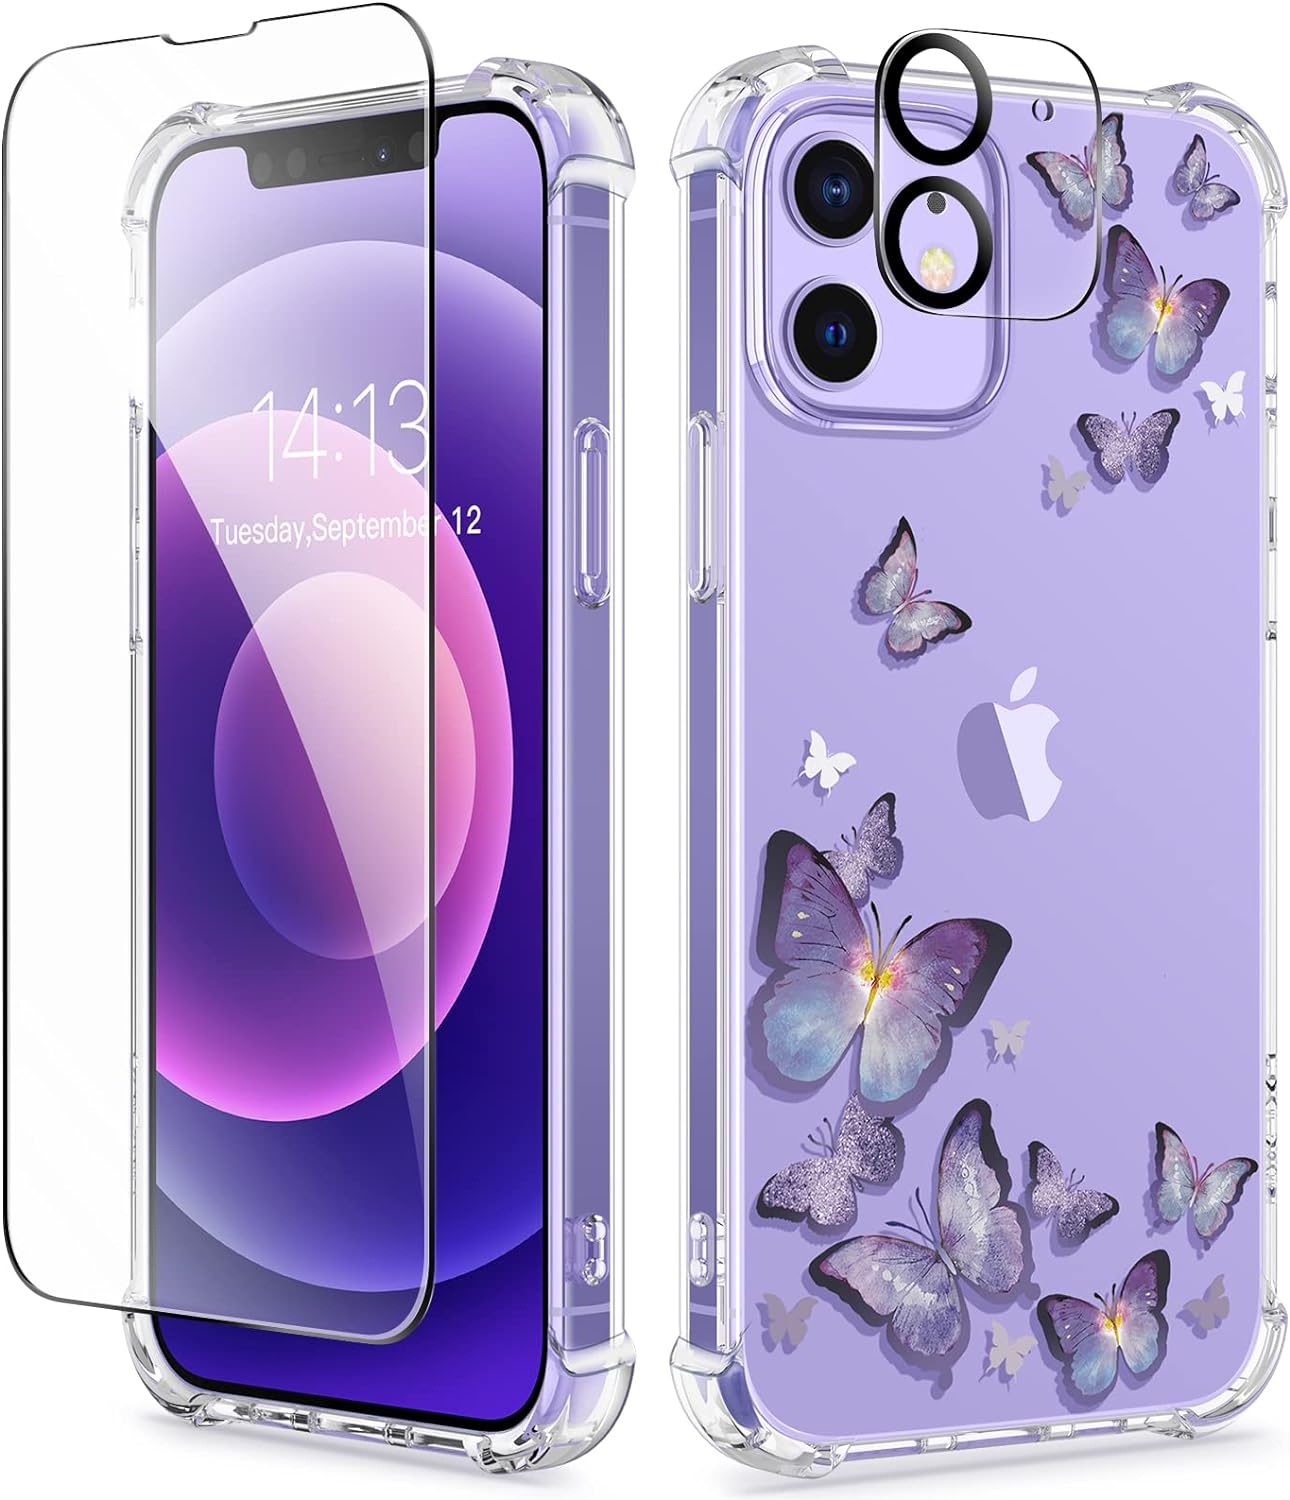 GVIEWIN for iPhone 12 Case and iPhone 12 Pro Case with Screen Protector + Camera Lens Protector, Clear Floral Flexible TPU Shockproof Women Girls Flower Phone Case 6.1(Alluring Butterfly/Purple)